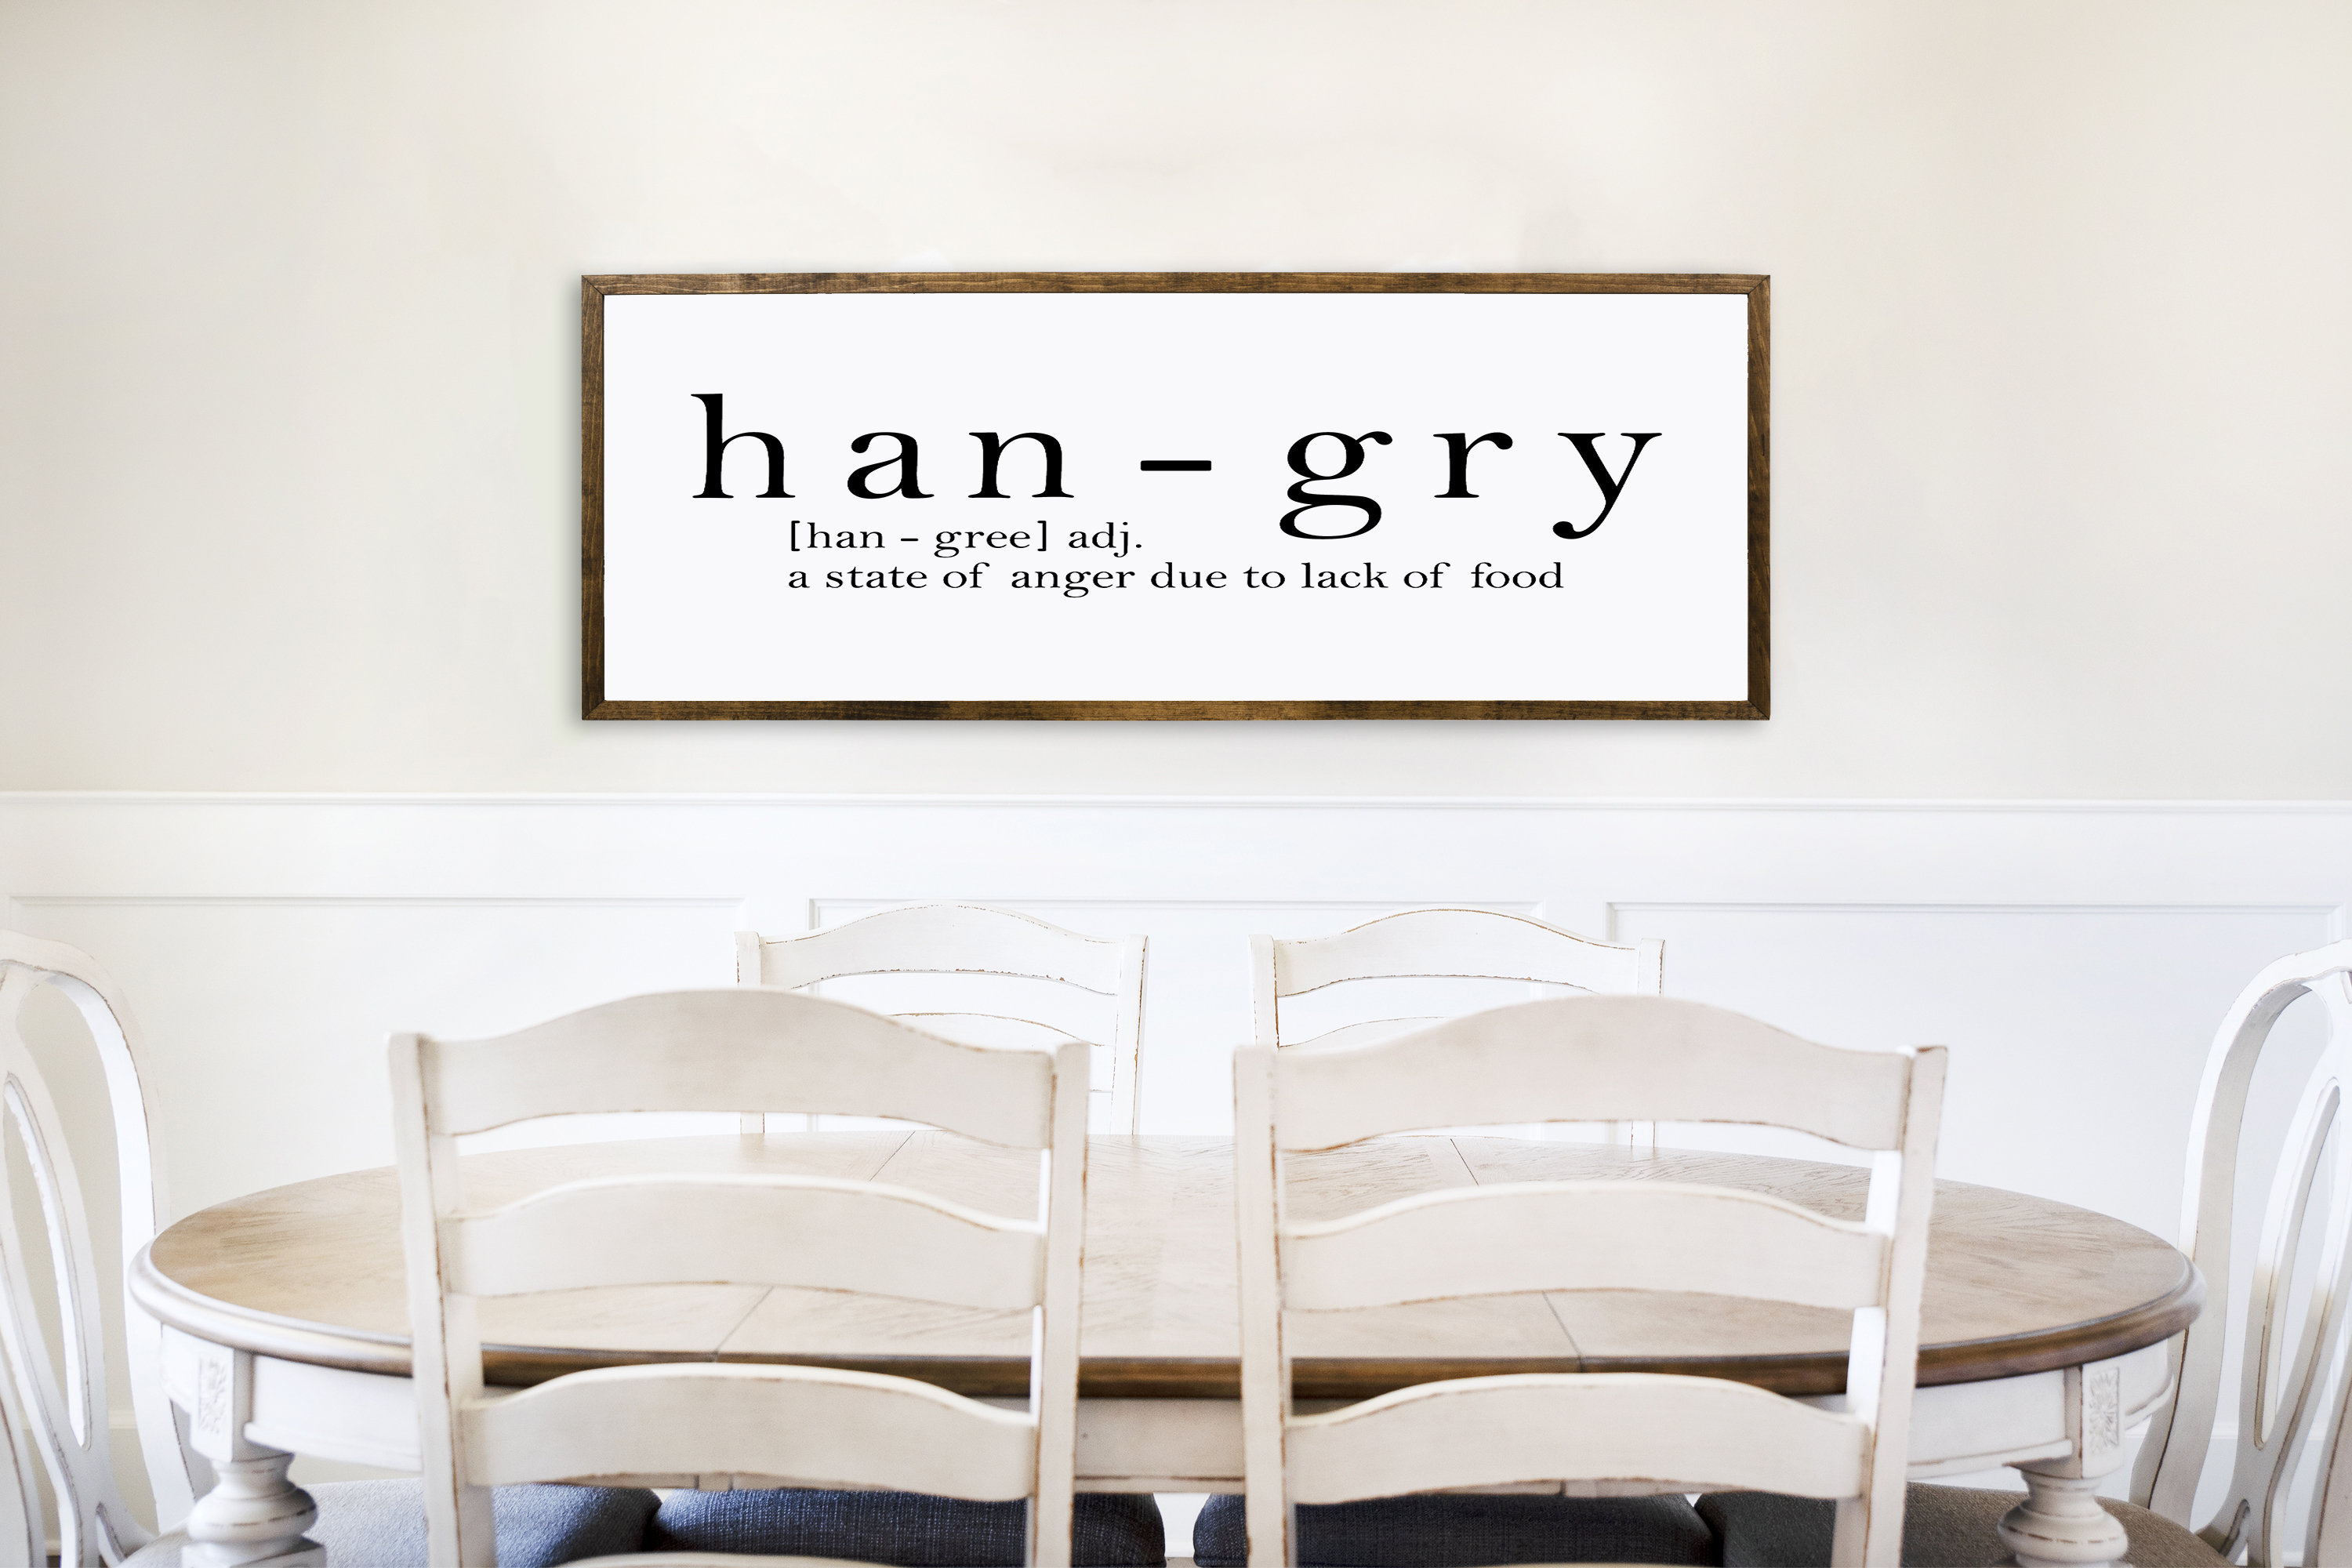 Hangry Funny Kitchen Farmhouse Style Wooden Wall Decor, Kitchen Wood Sign,  Rustic Style Wooden Sign, Country Kitchen Decor, Home Decor